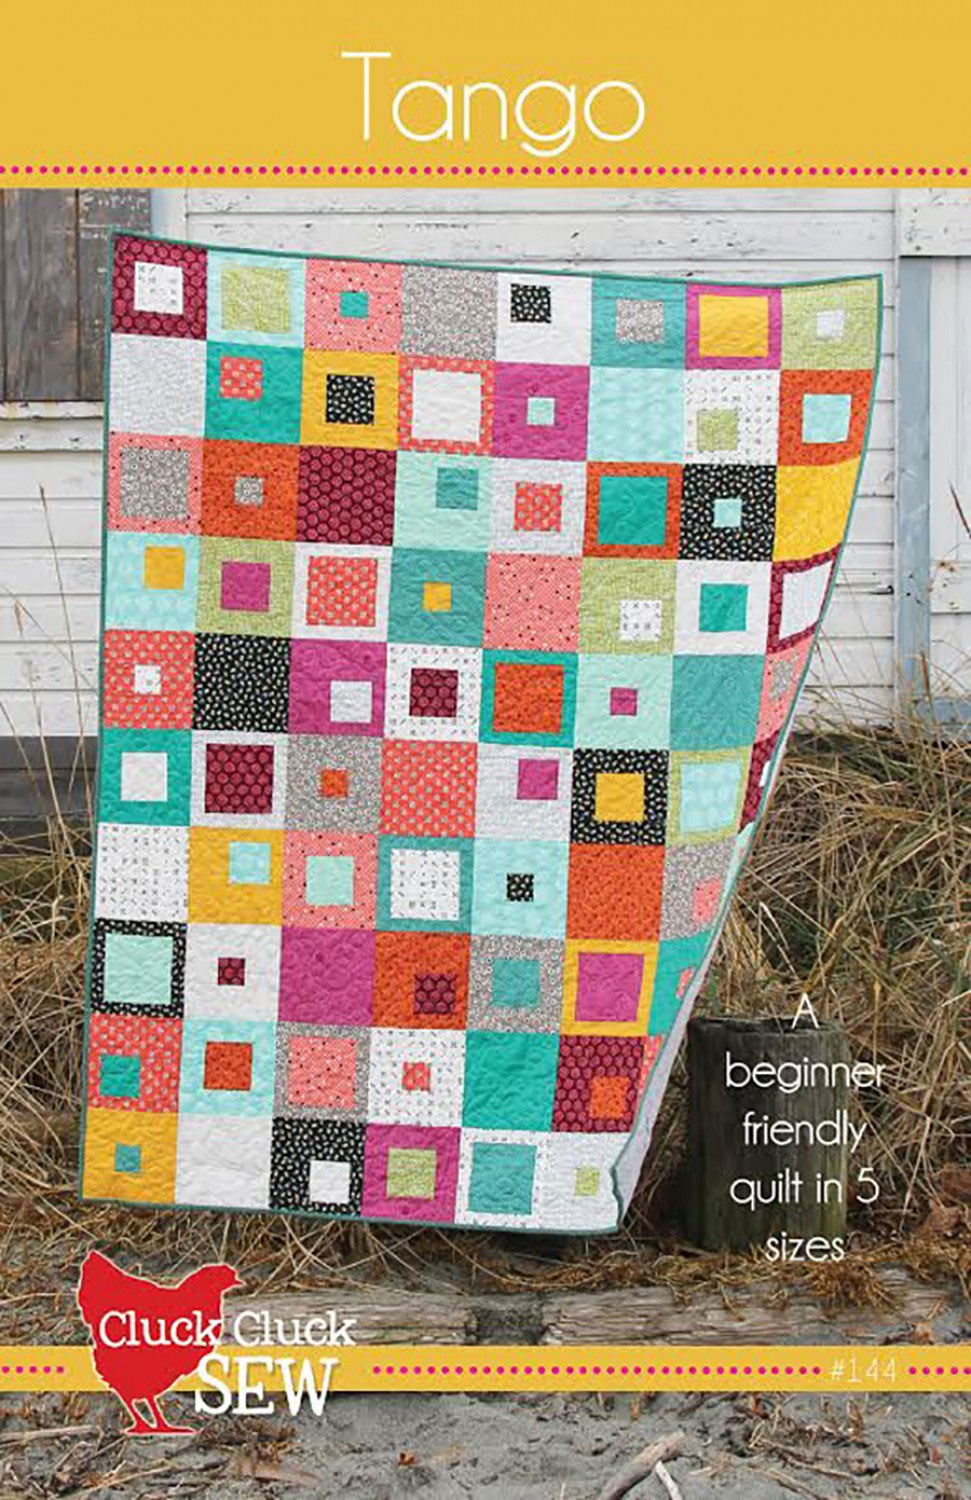 Tango-quilt-sewing-pattern-Cluck-Cluck-Sew-front